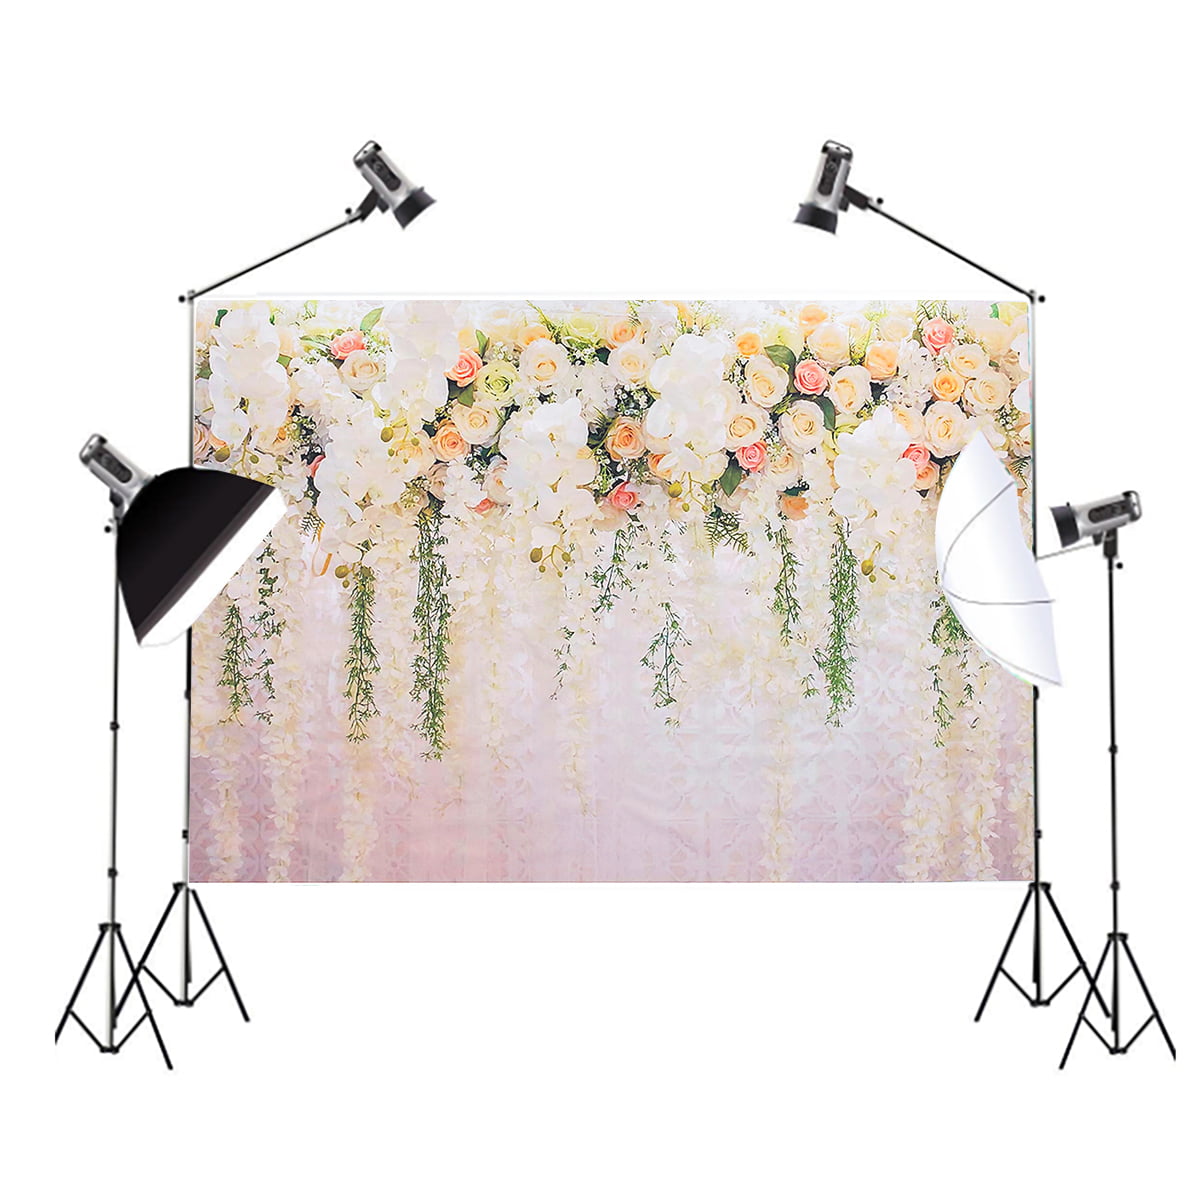 Photography Backdrops Vinyl Floral Photo Decors Background Wall Studio Props Uk 